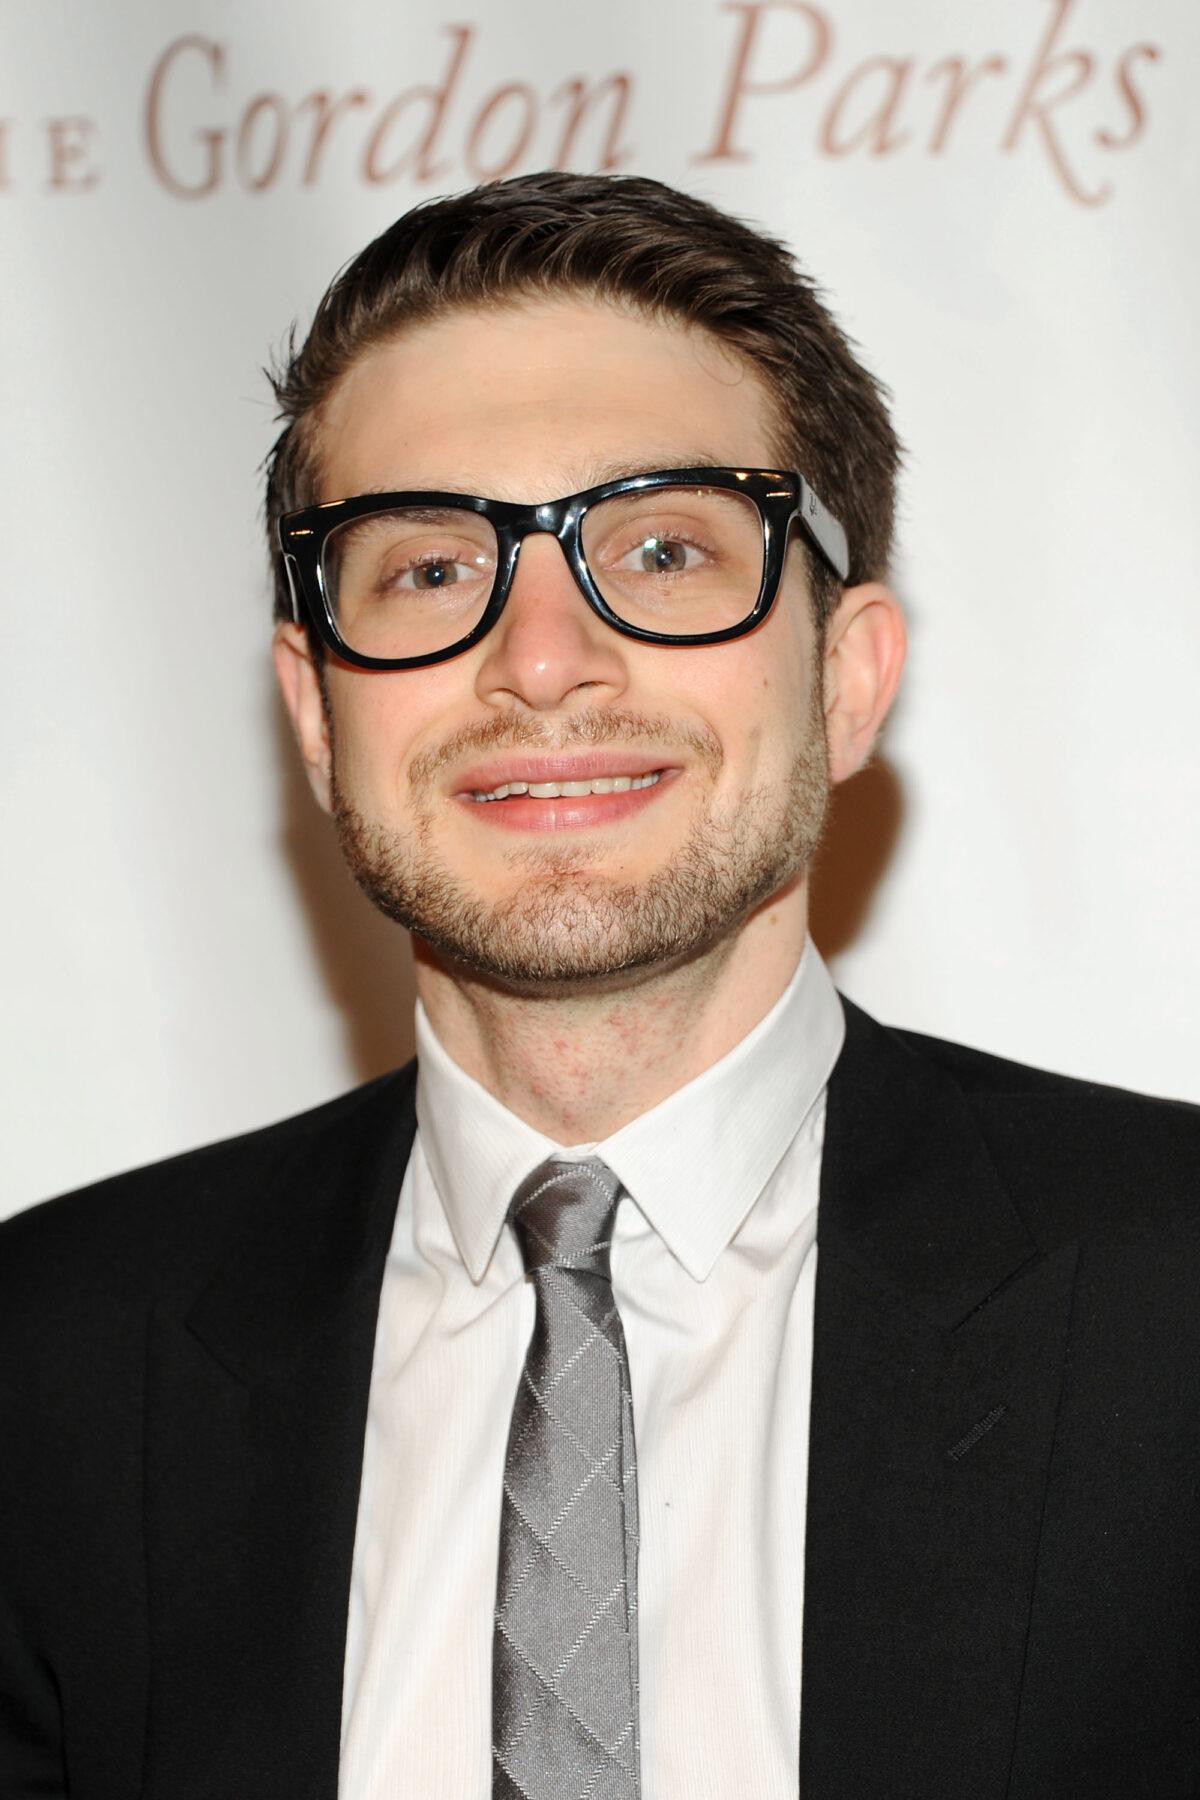 Philanthropist Alex Soros, son of George Soros, attends an event in New York on June 4, 2013. (Ben Gabbe/Getty Images)